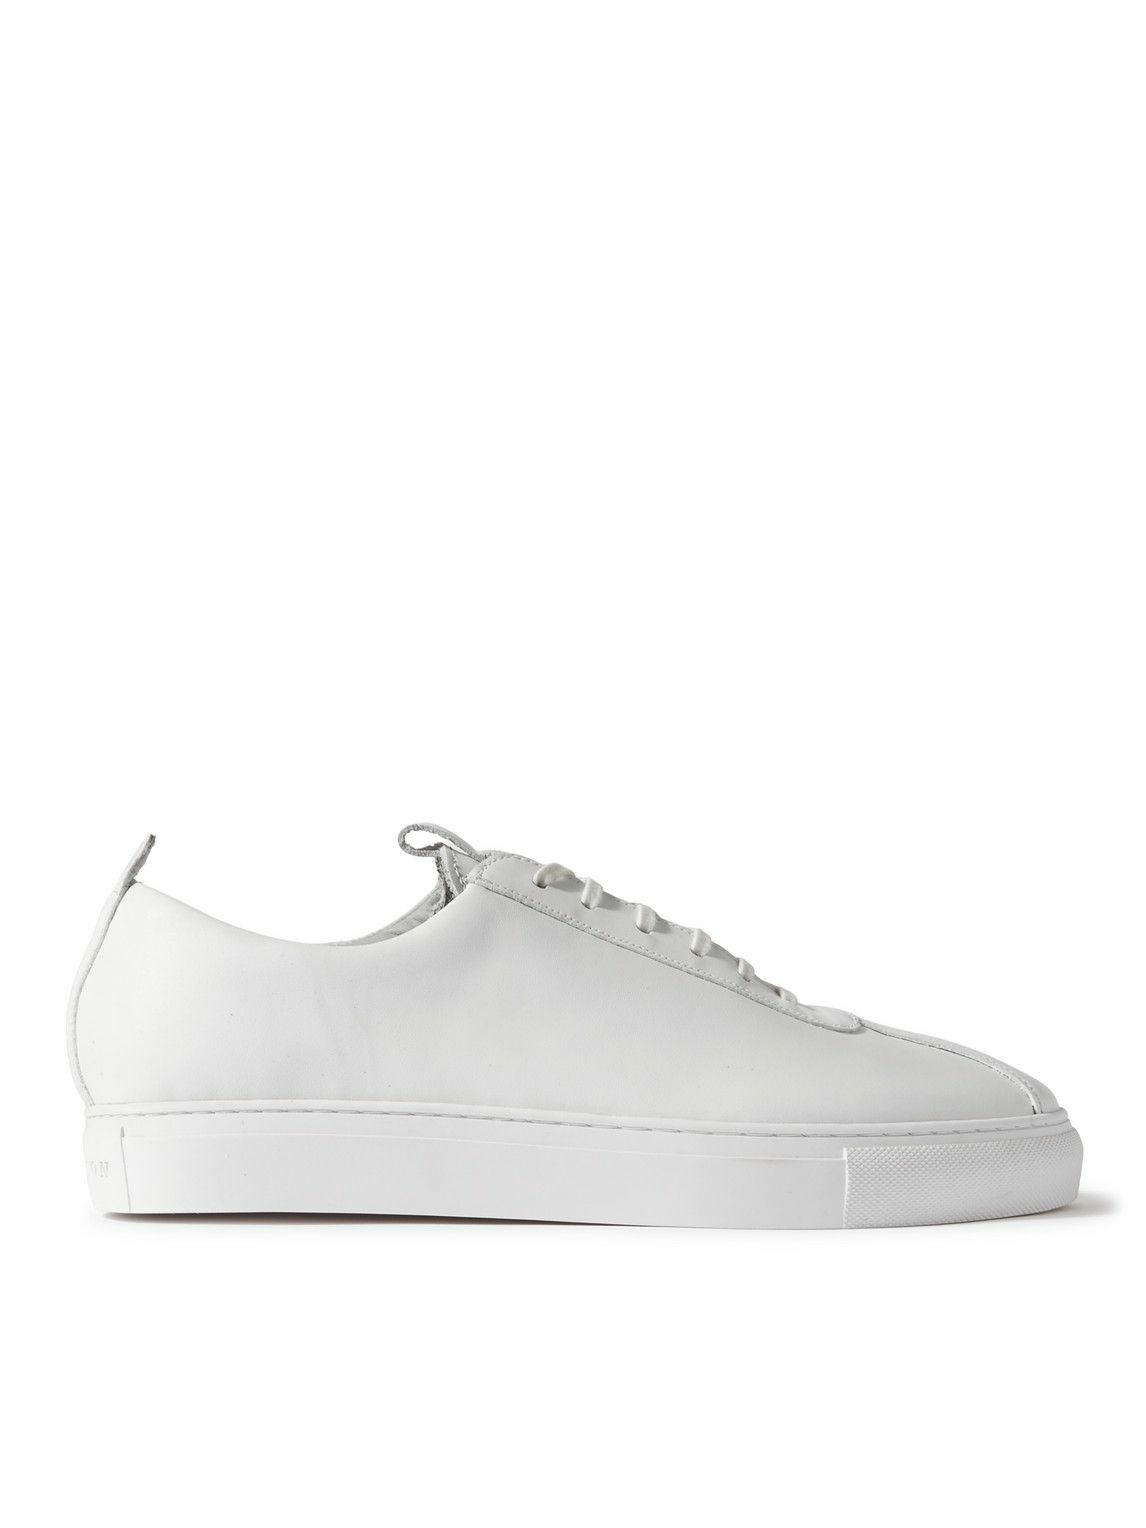 Grenson - Leather Sneakers - White Grenson